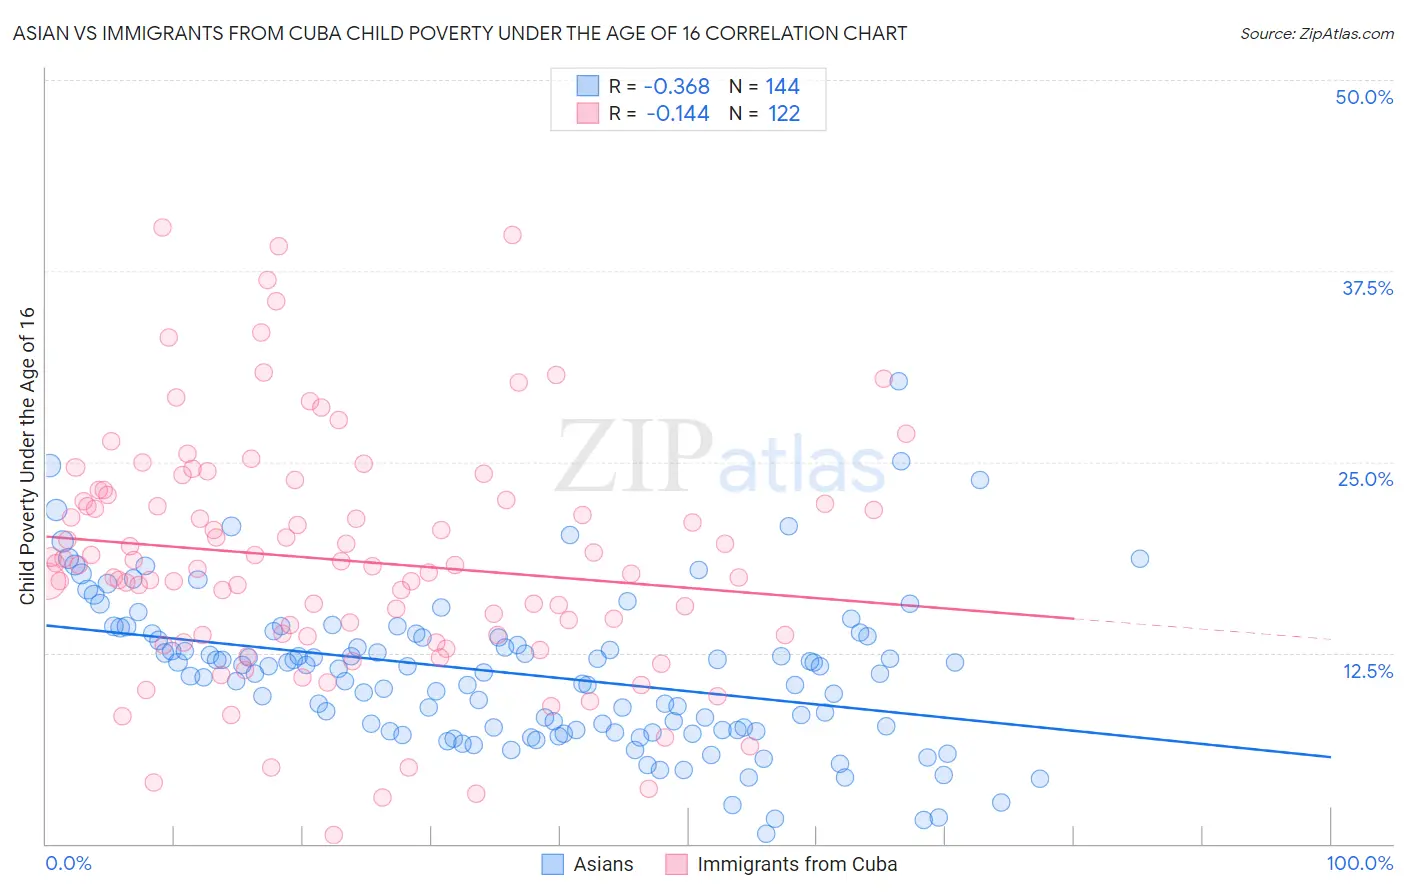 Asian vs Immigrants from Cuba Child Poverty Under the Age of 16